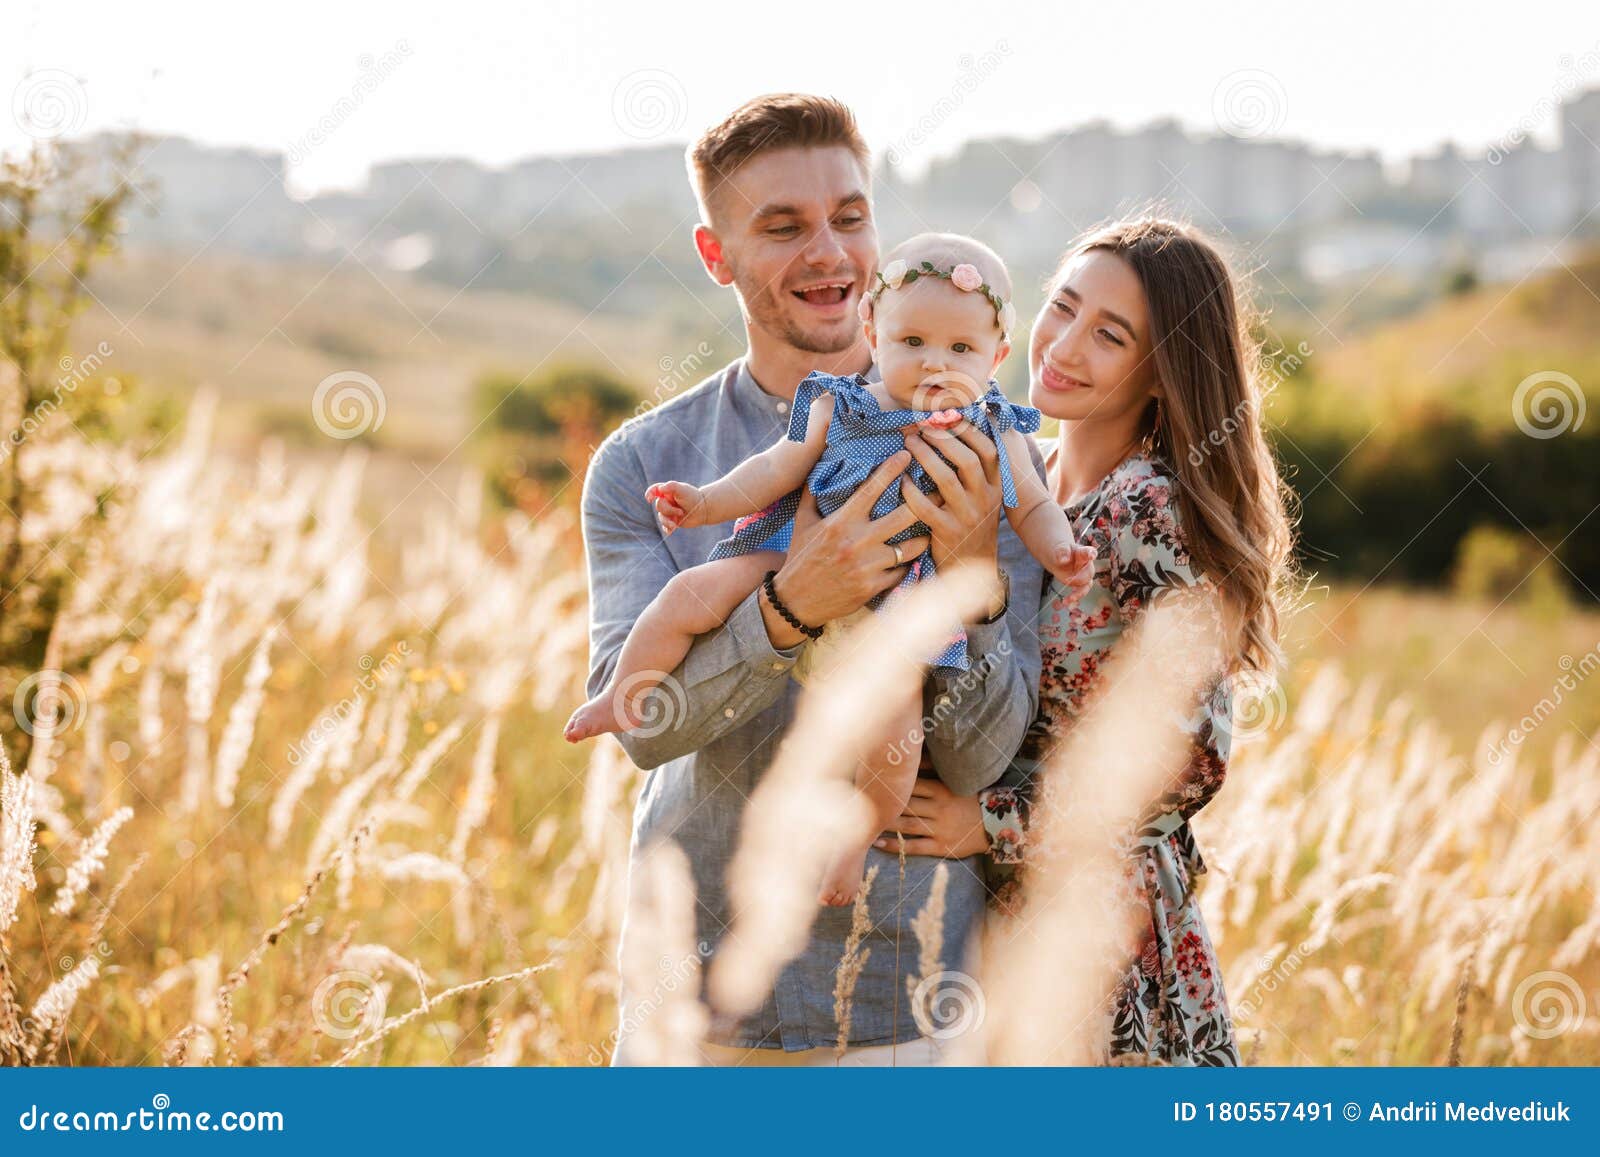 Dad and daughter stock photo. Image of love, happiness 